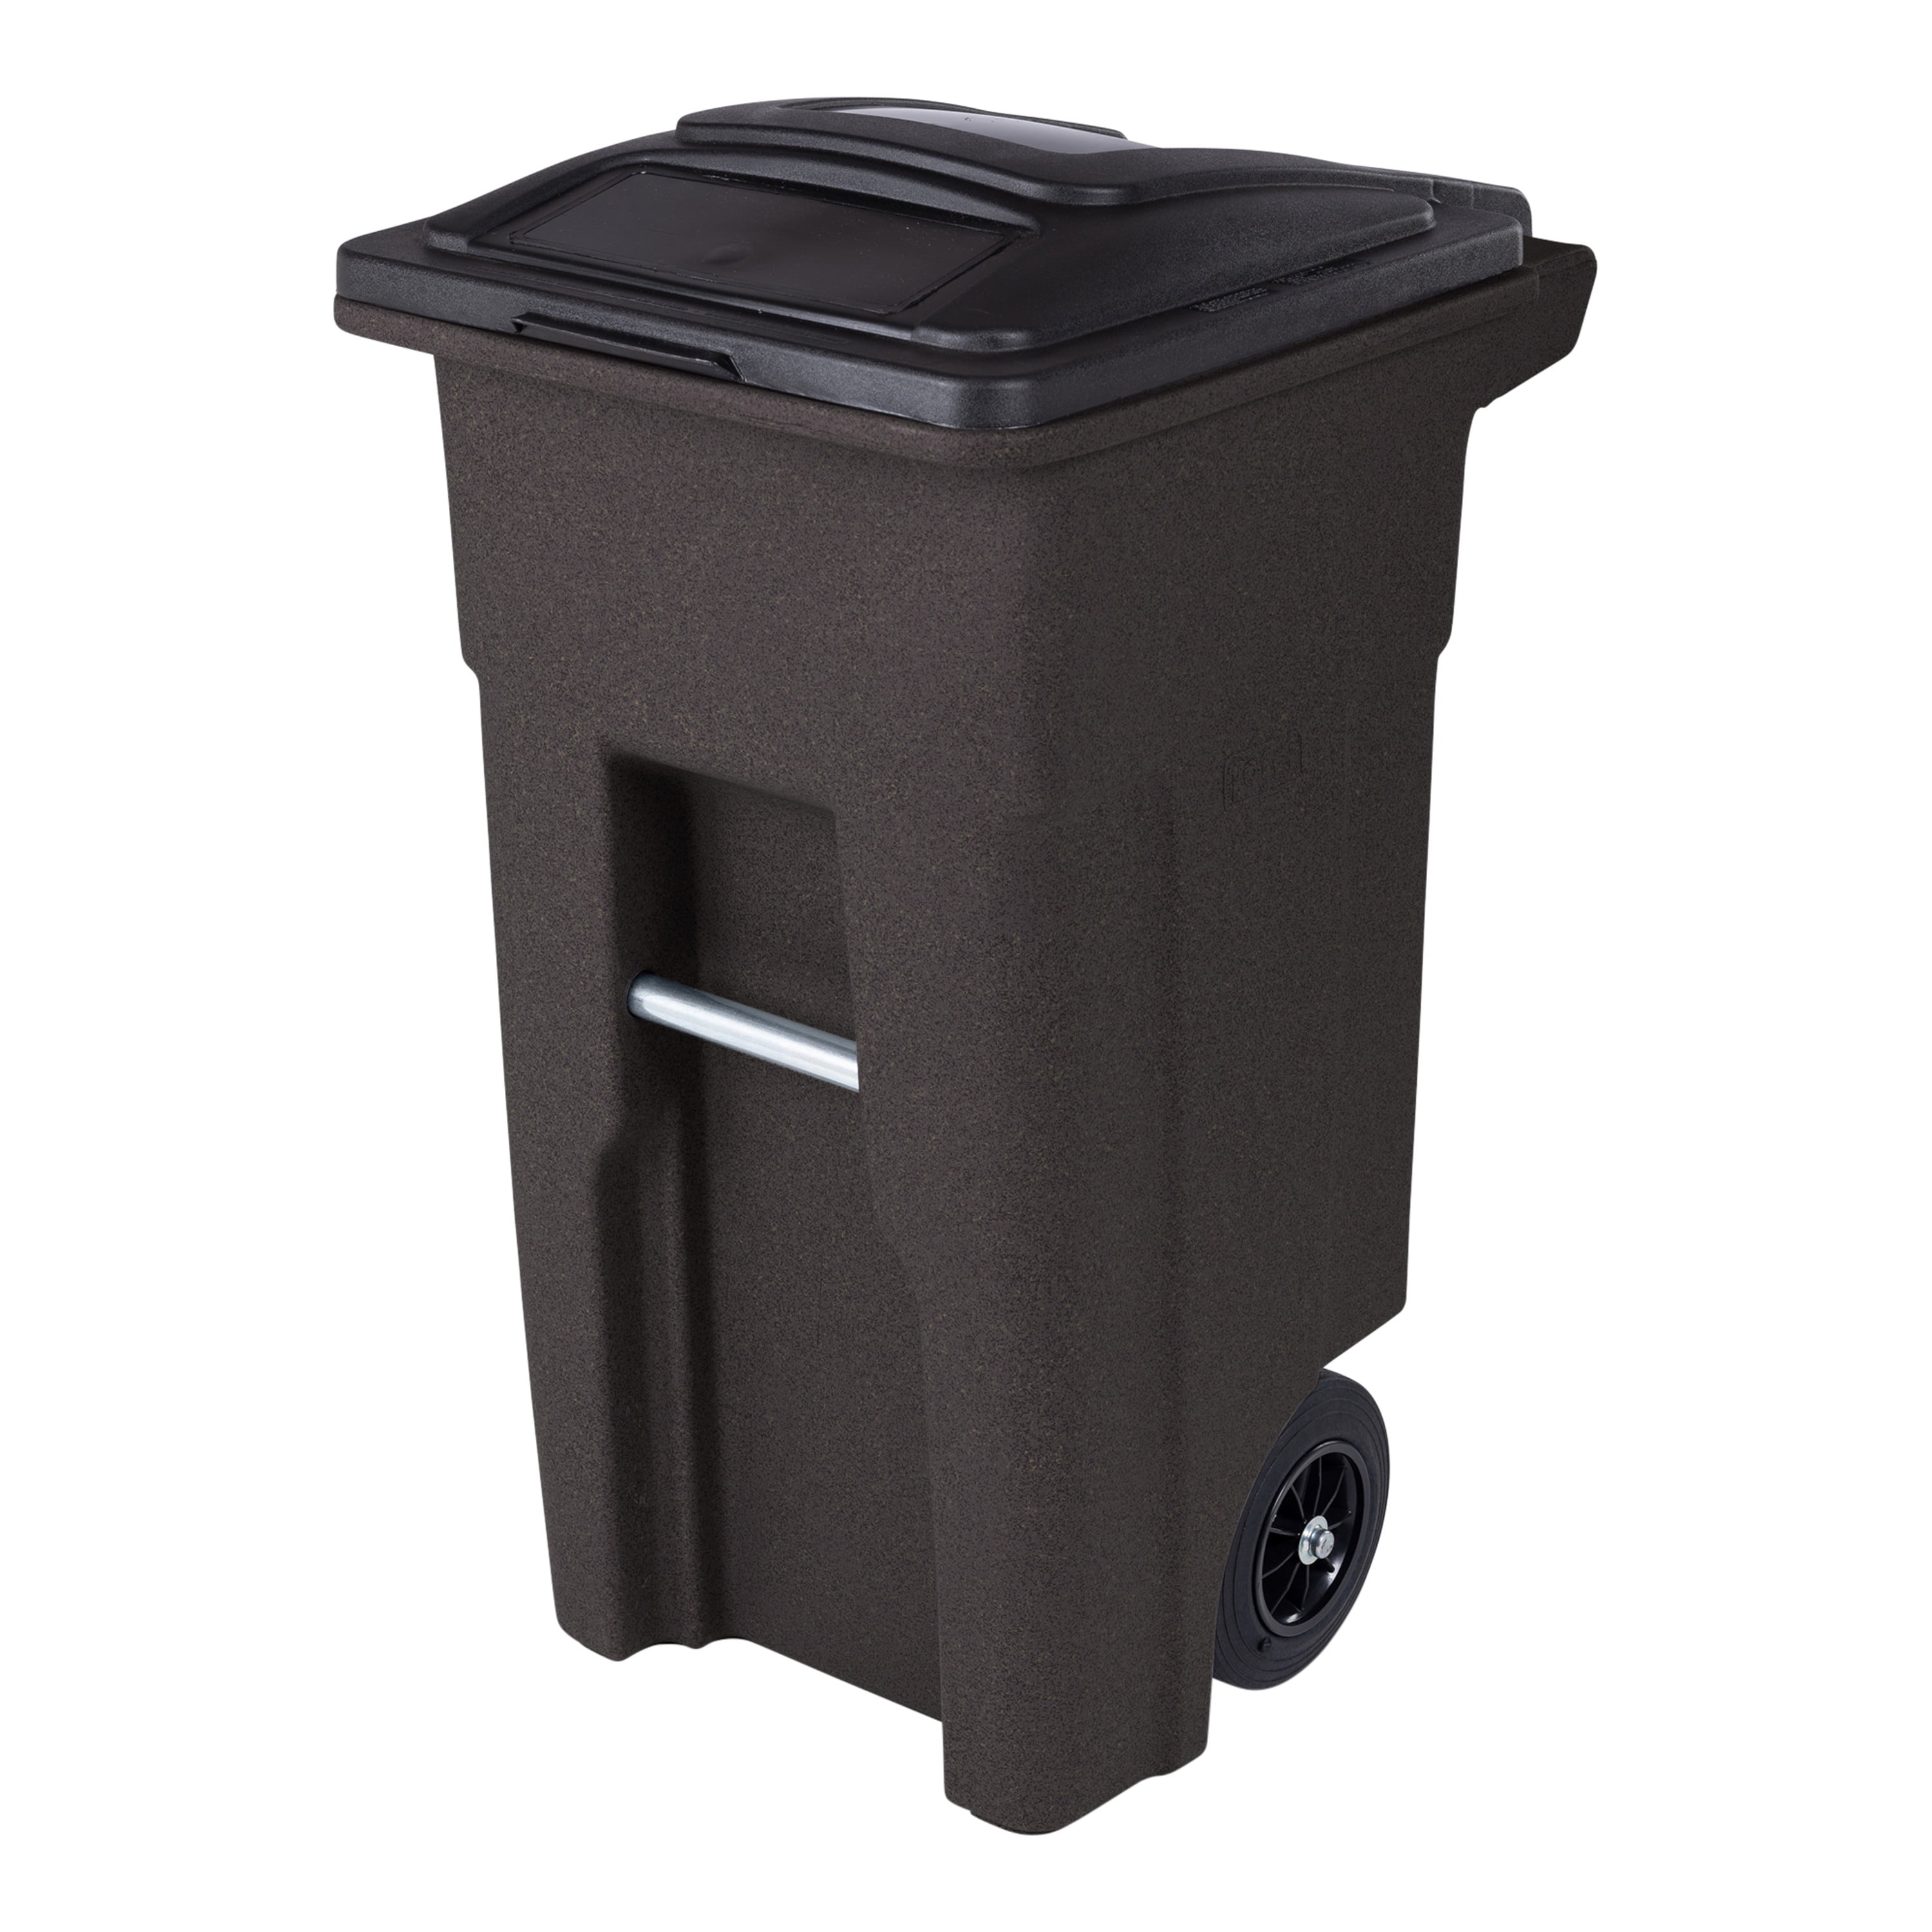 Lavex 32 Gallon Brown Round Commercial Trash Can with Lid and Dolly